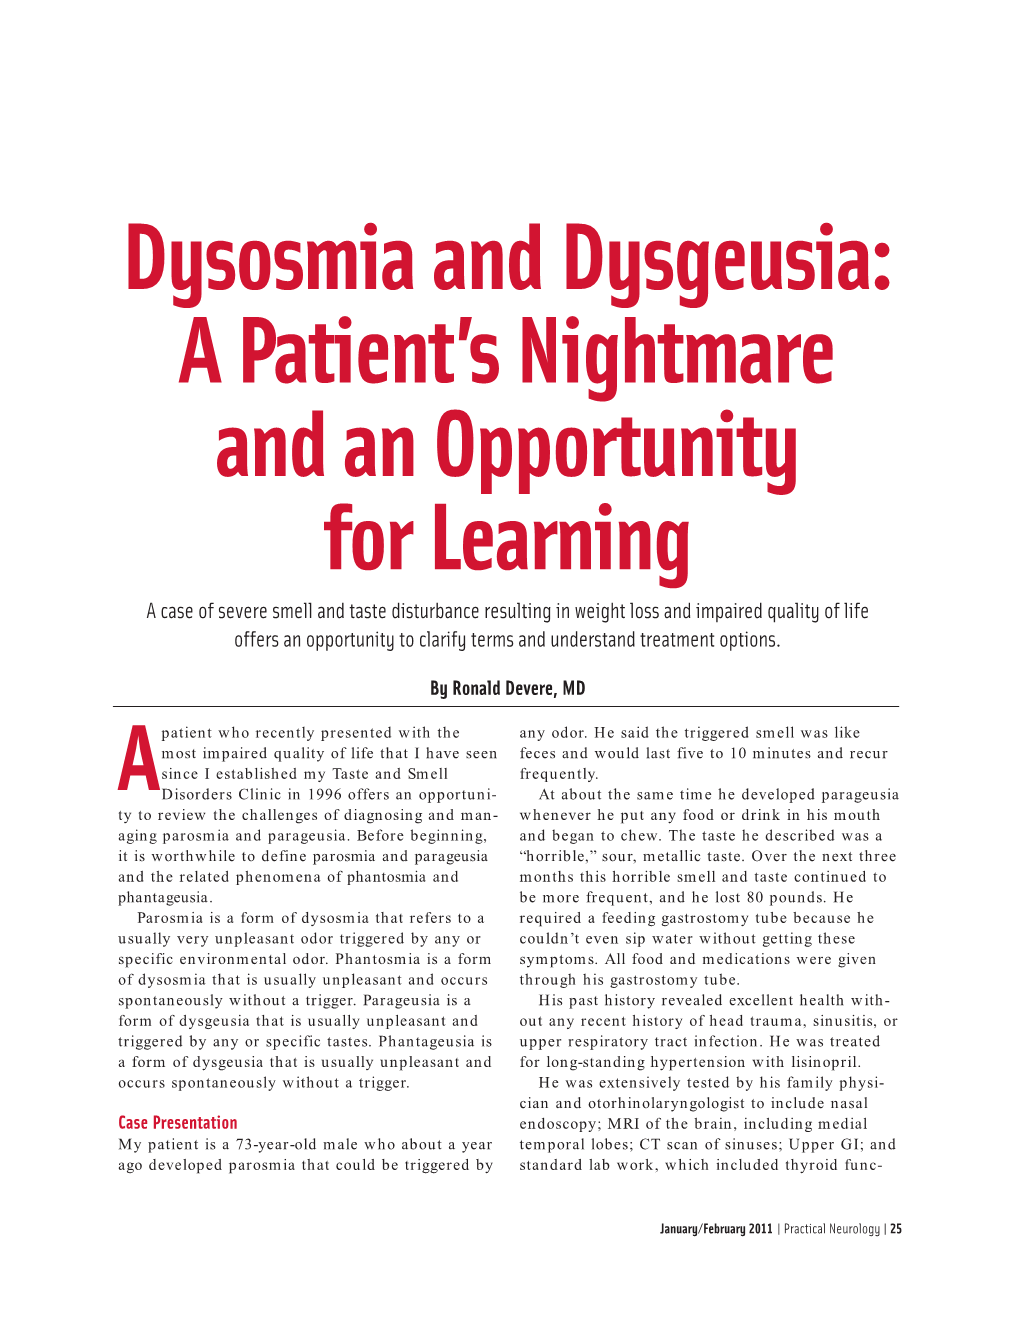 Dysosmia and Dysgeusia: a Patient's Nightmare and an Opportunity For